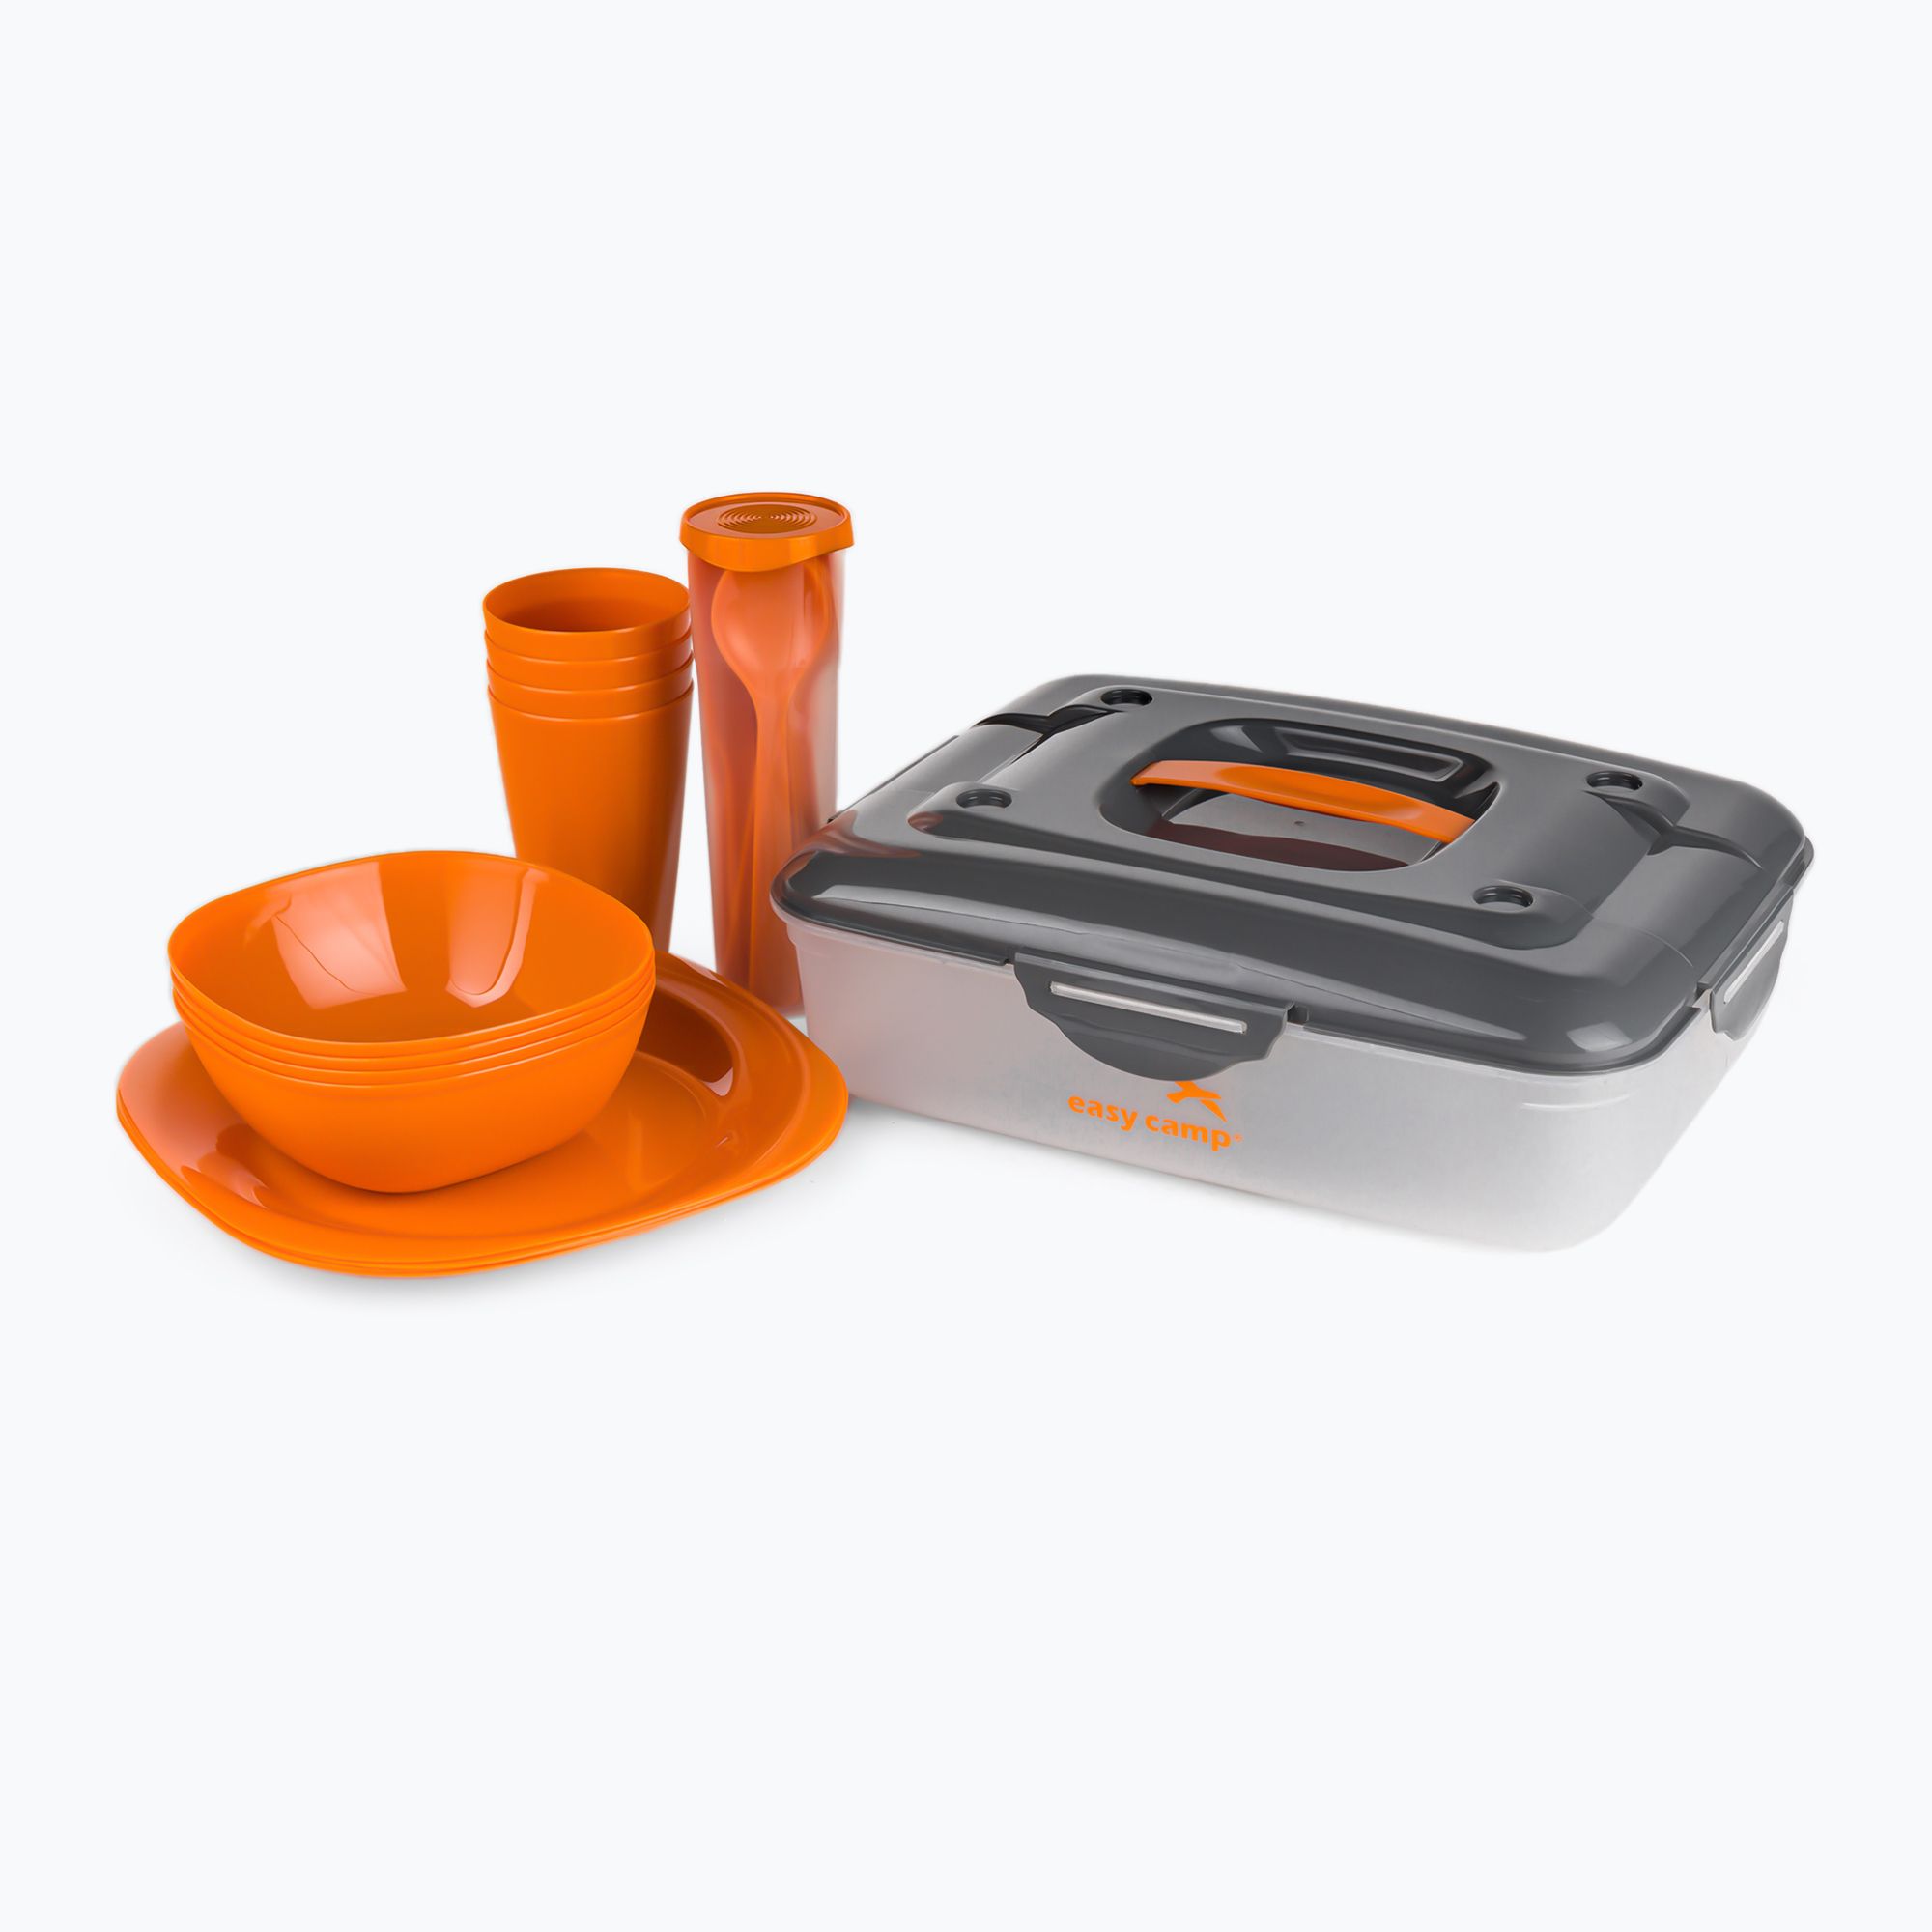 Easy Camp Box Persons set orange Cerf hiking 680162 4 Picnic cookware